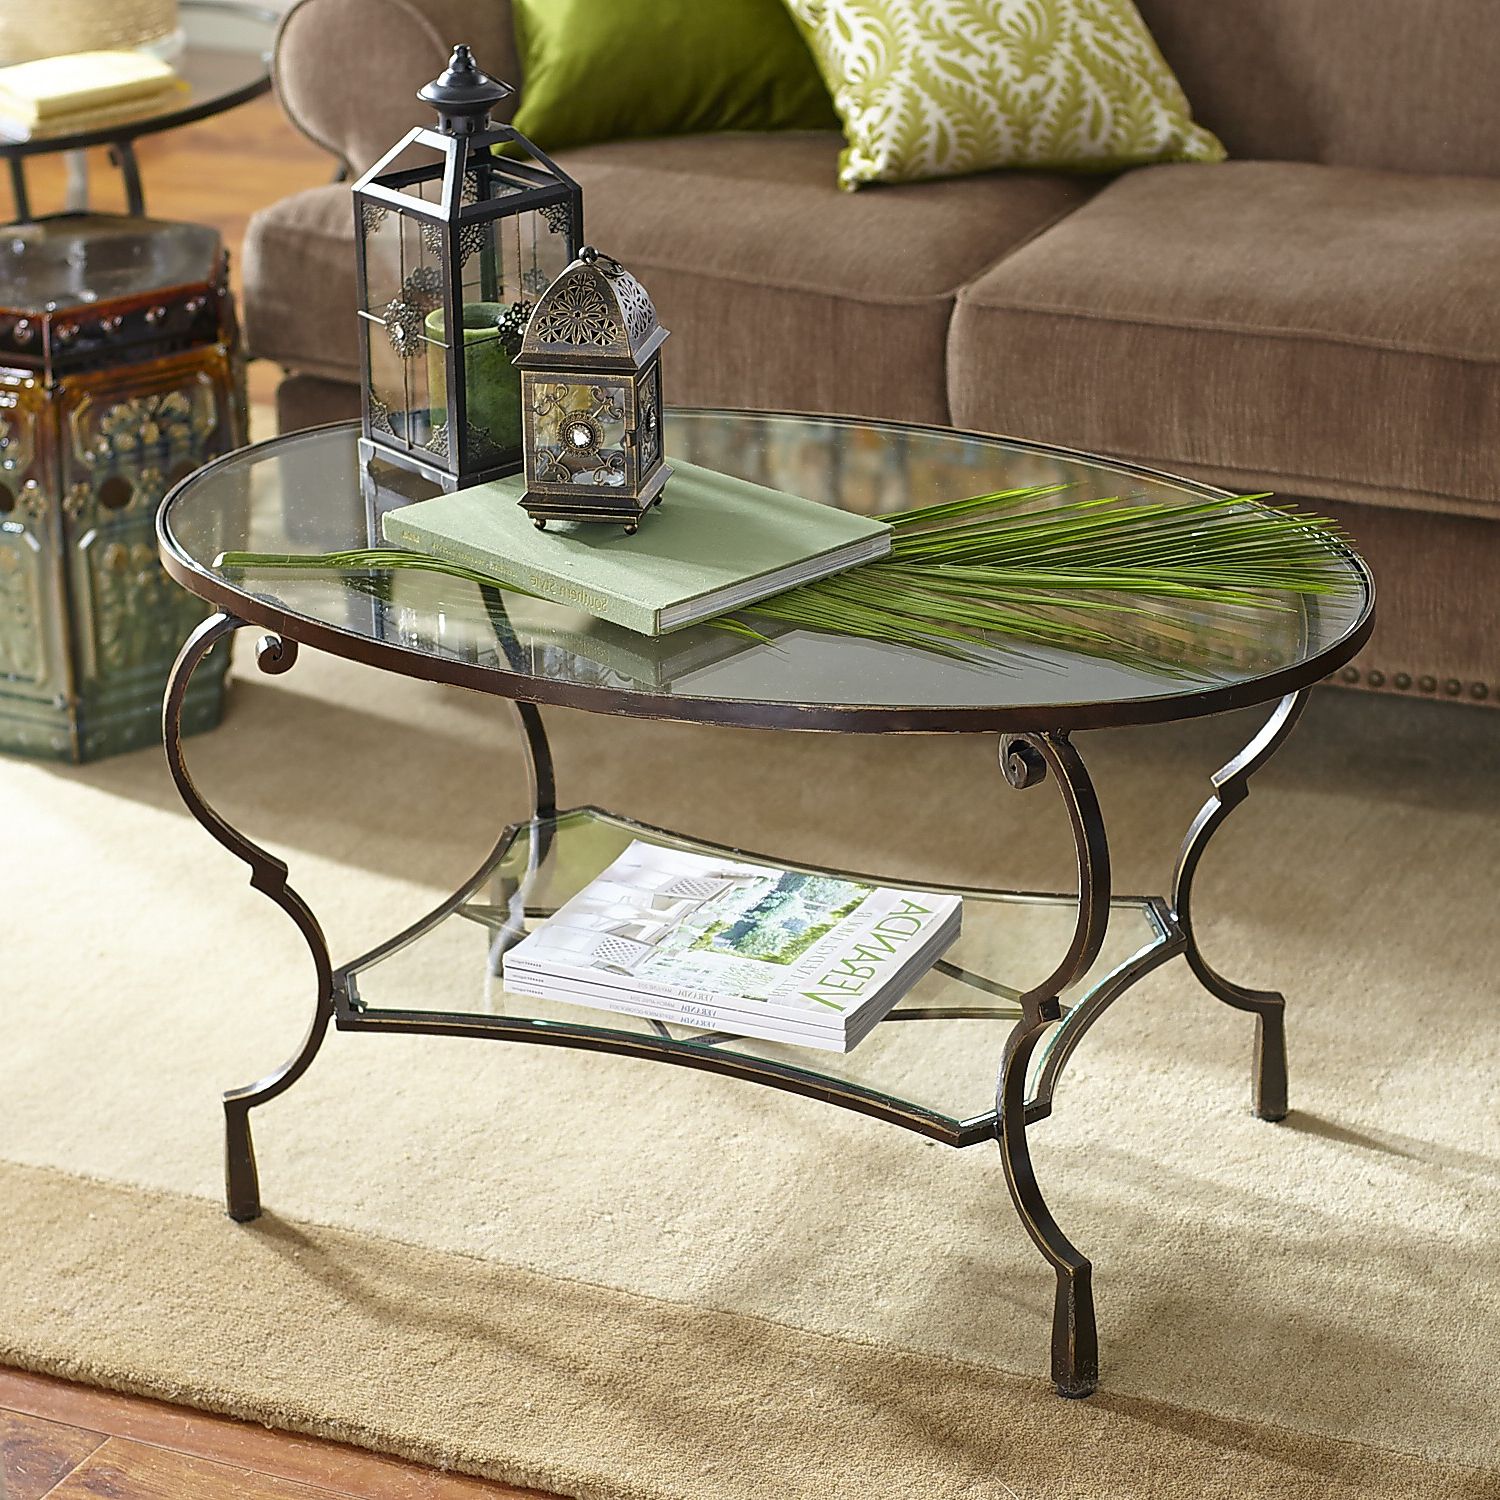 Chasca Glass Top Oval Coffee Table – Pier1 Throughout Most Recently Released Espresso Wood And Glass Top Coffee Tables (Gallery 2 of 20)